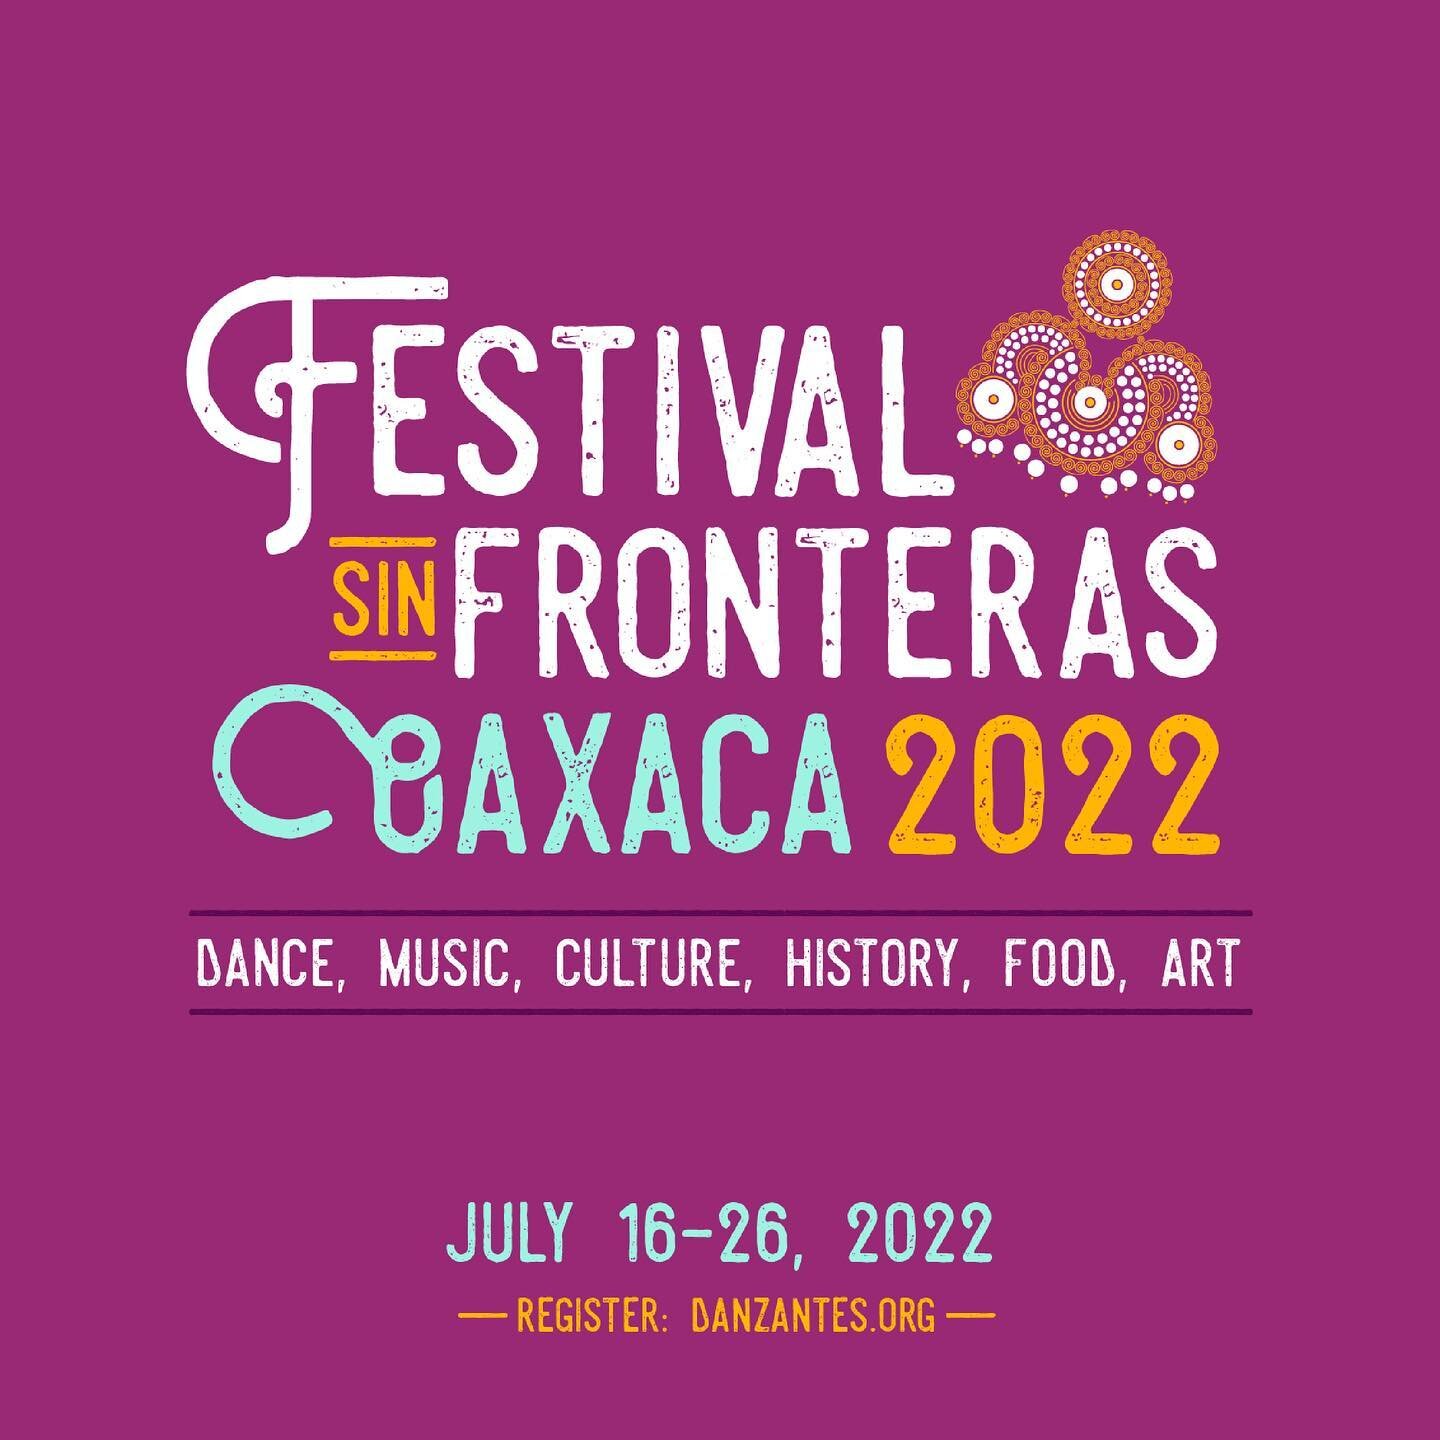 Branding for Festival Sin Fronteras which took place in Oaxaca, Mexico in 2022. 

Festival Sin Fronteras is a festival that celebrates the folklore, the culture, music, art, dance, history and food of regions in Mexico! Hosted by @danzantesunidosfest